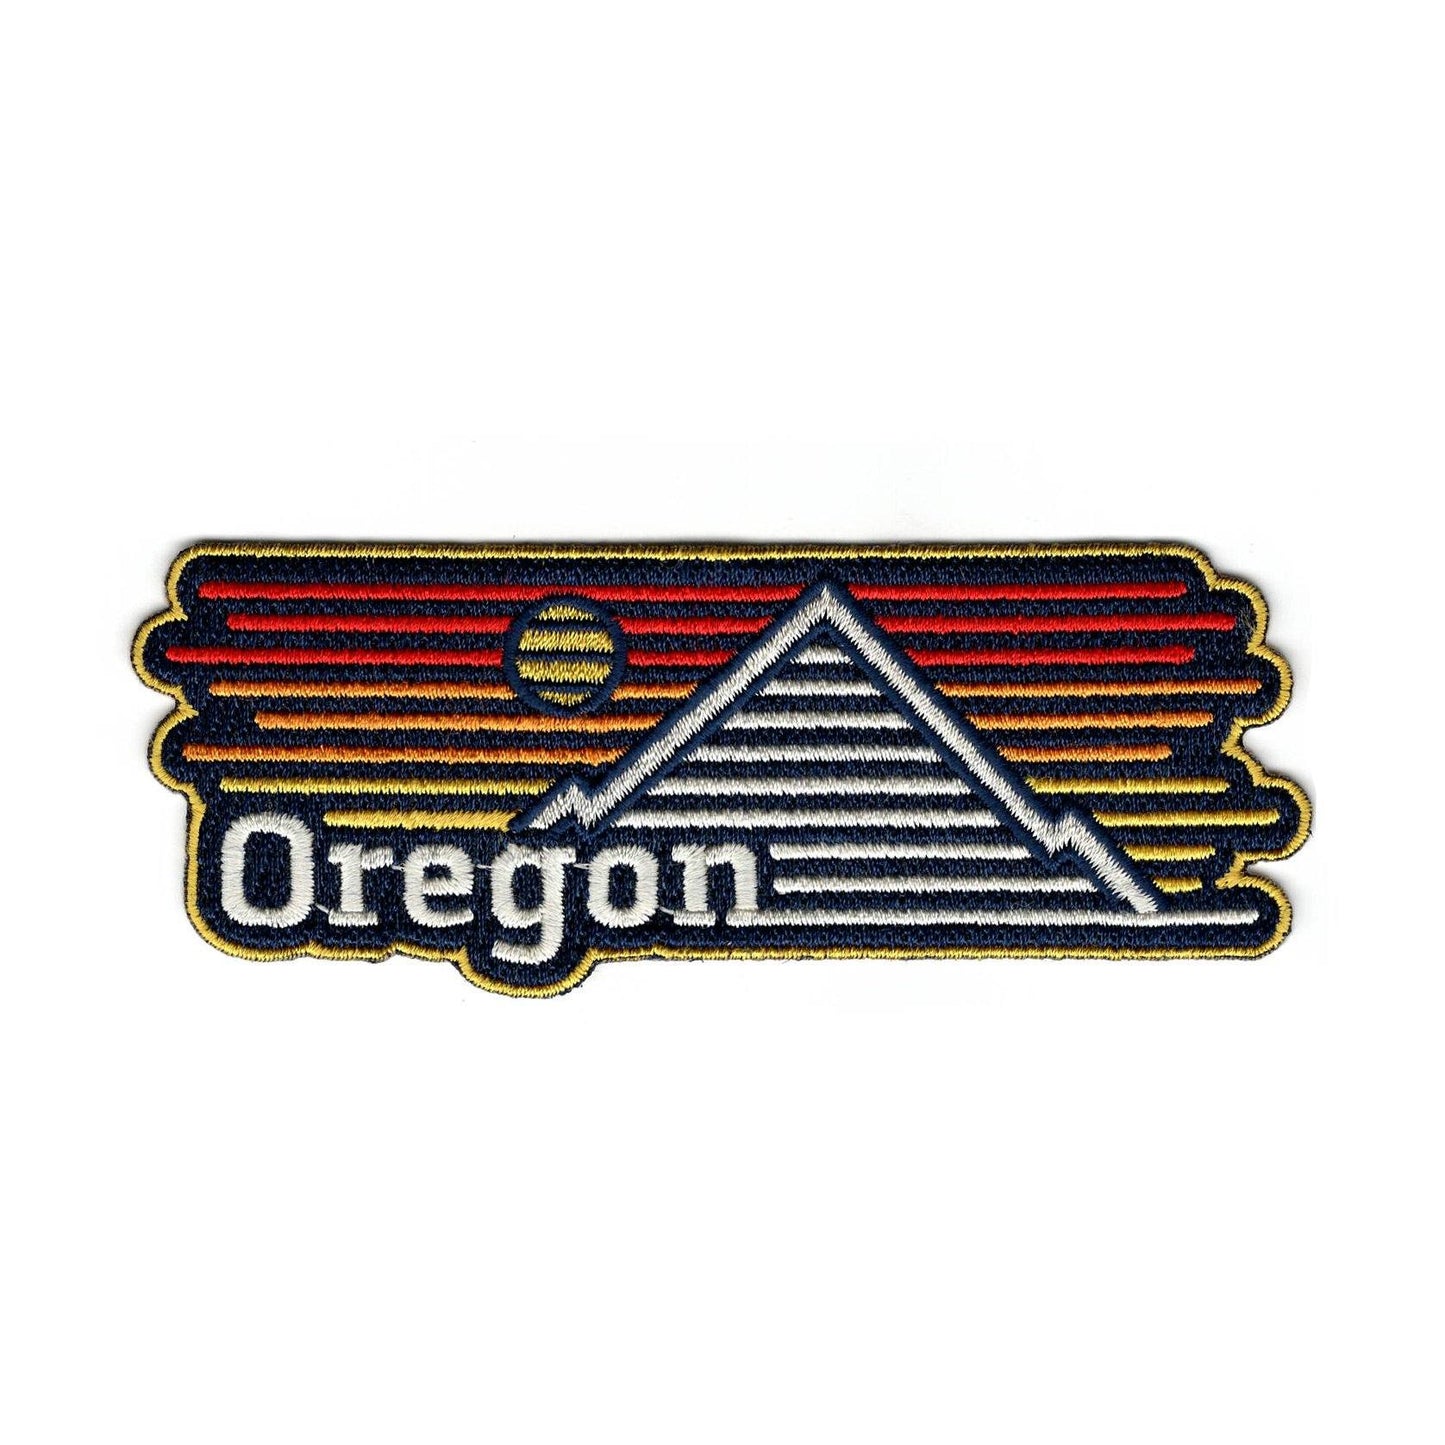 Oregon Horizons | Embroidered Patch